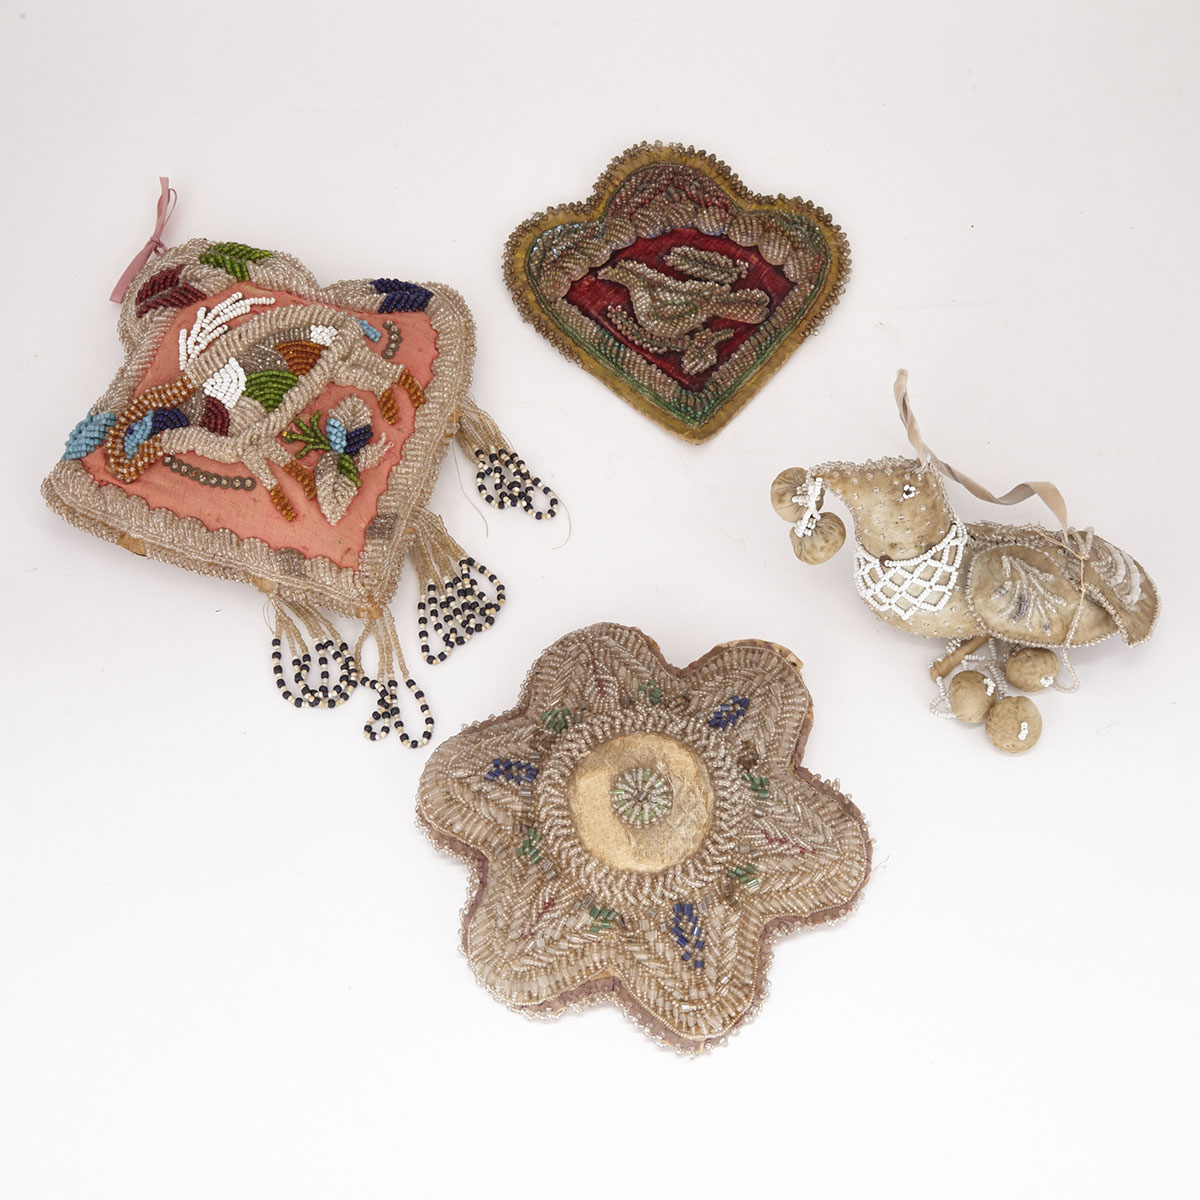 Four Iroquois Beaded Whimsies, late 19th/early 20th century